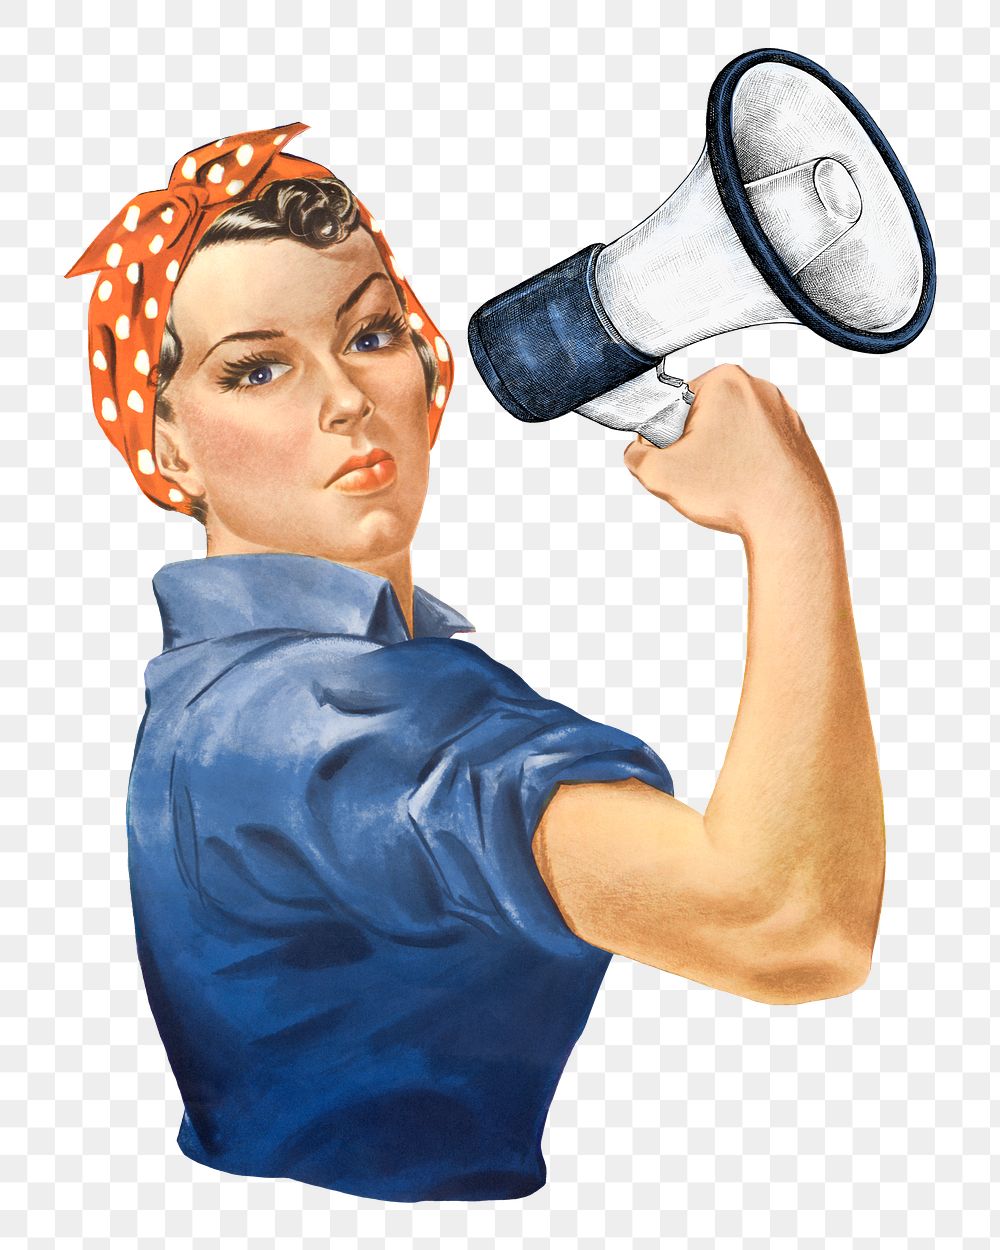 Woman holding png megaphone illustration, transparent background. Remixed by rawpixel.